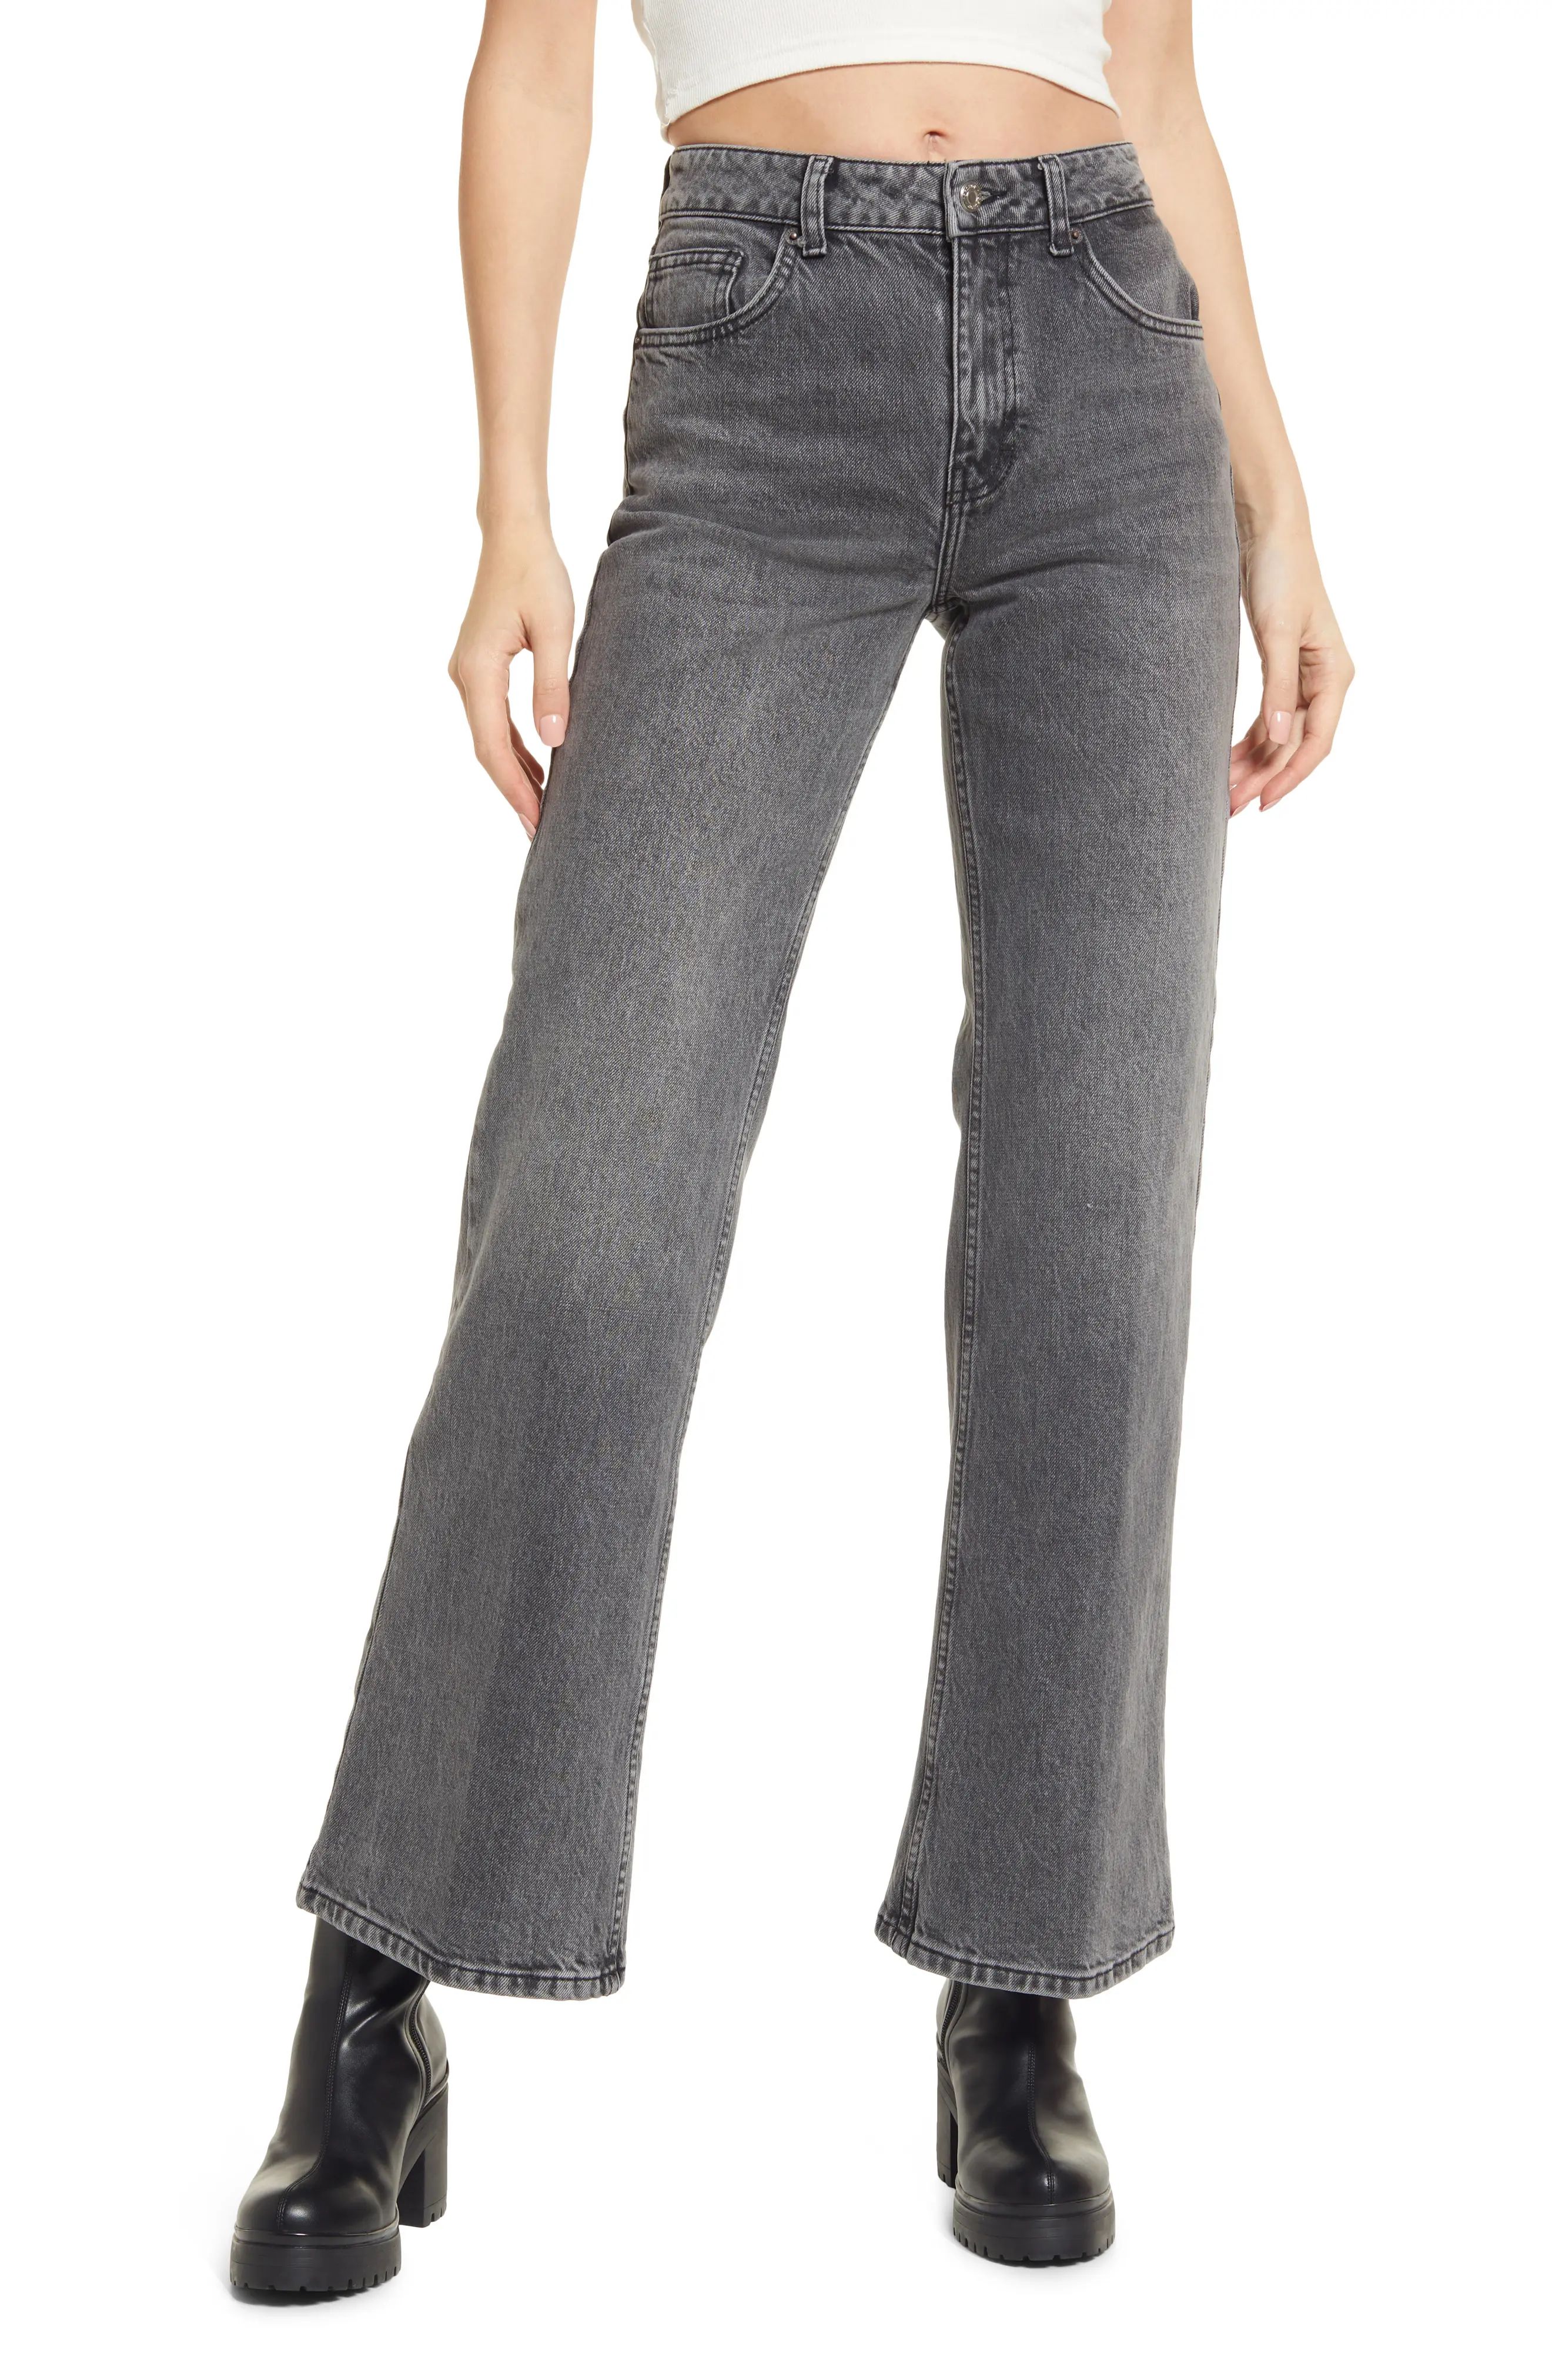 TOPSHOP Wide Leg Jeans in Grey at Nordstrom, Size 30 X 30 | Nordstrom